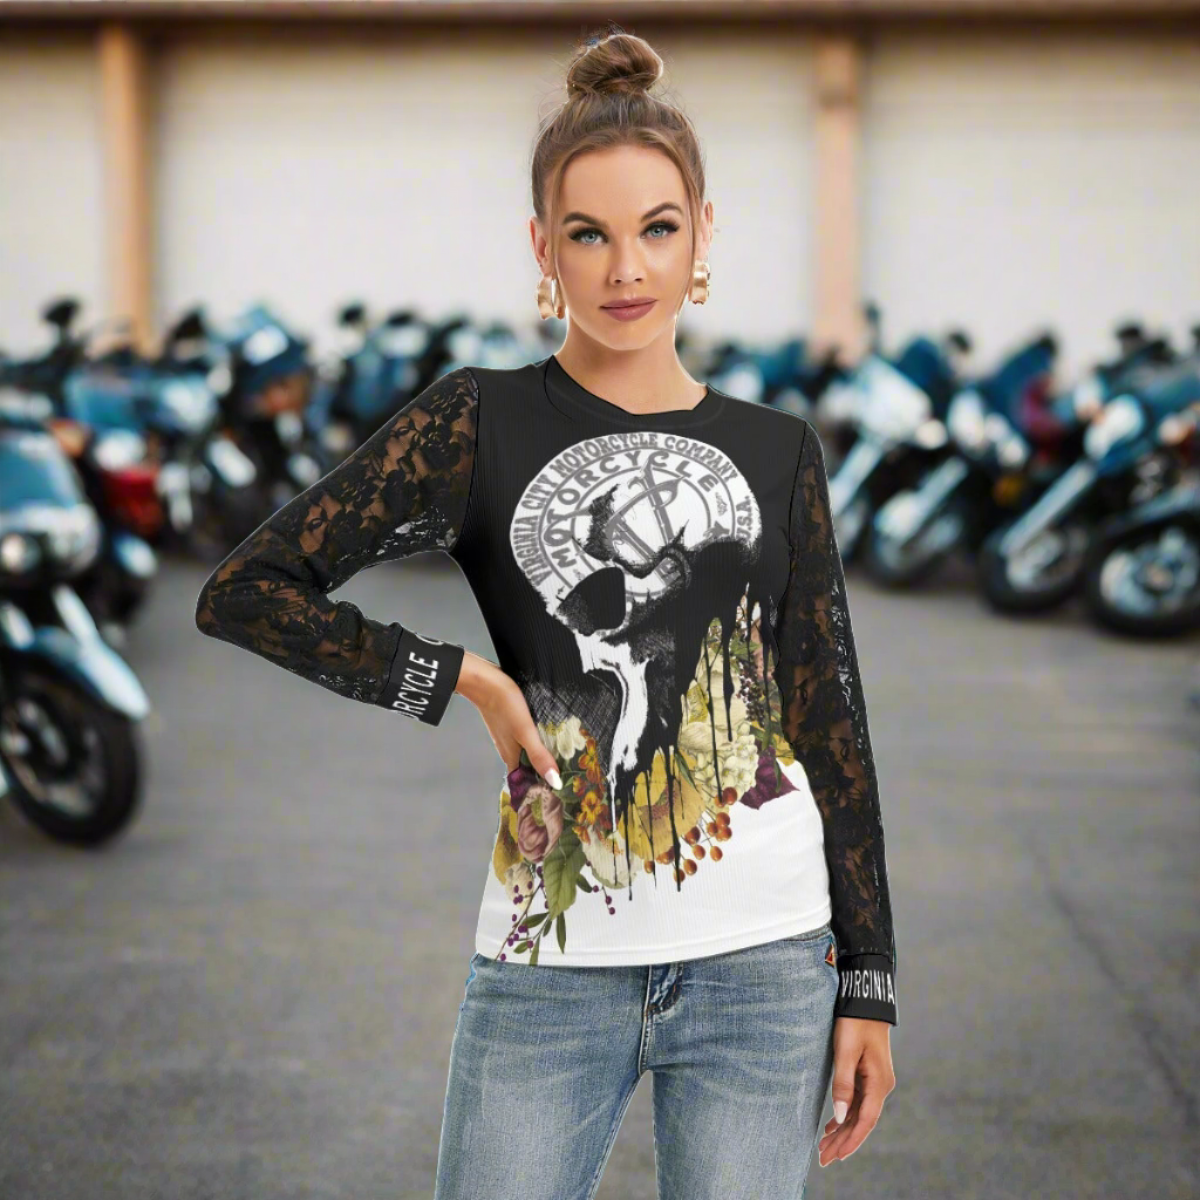 Black and Flower Skull T-Shirt with Lace Arms